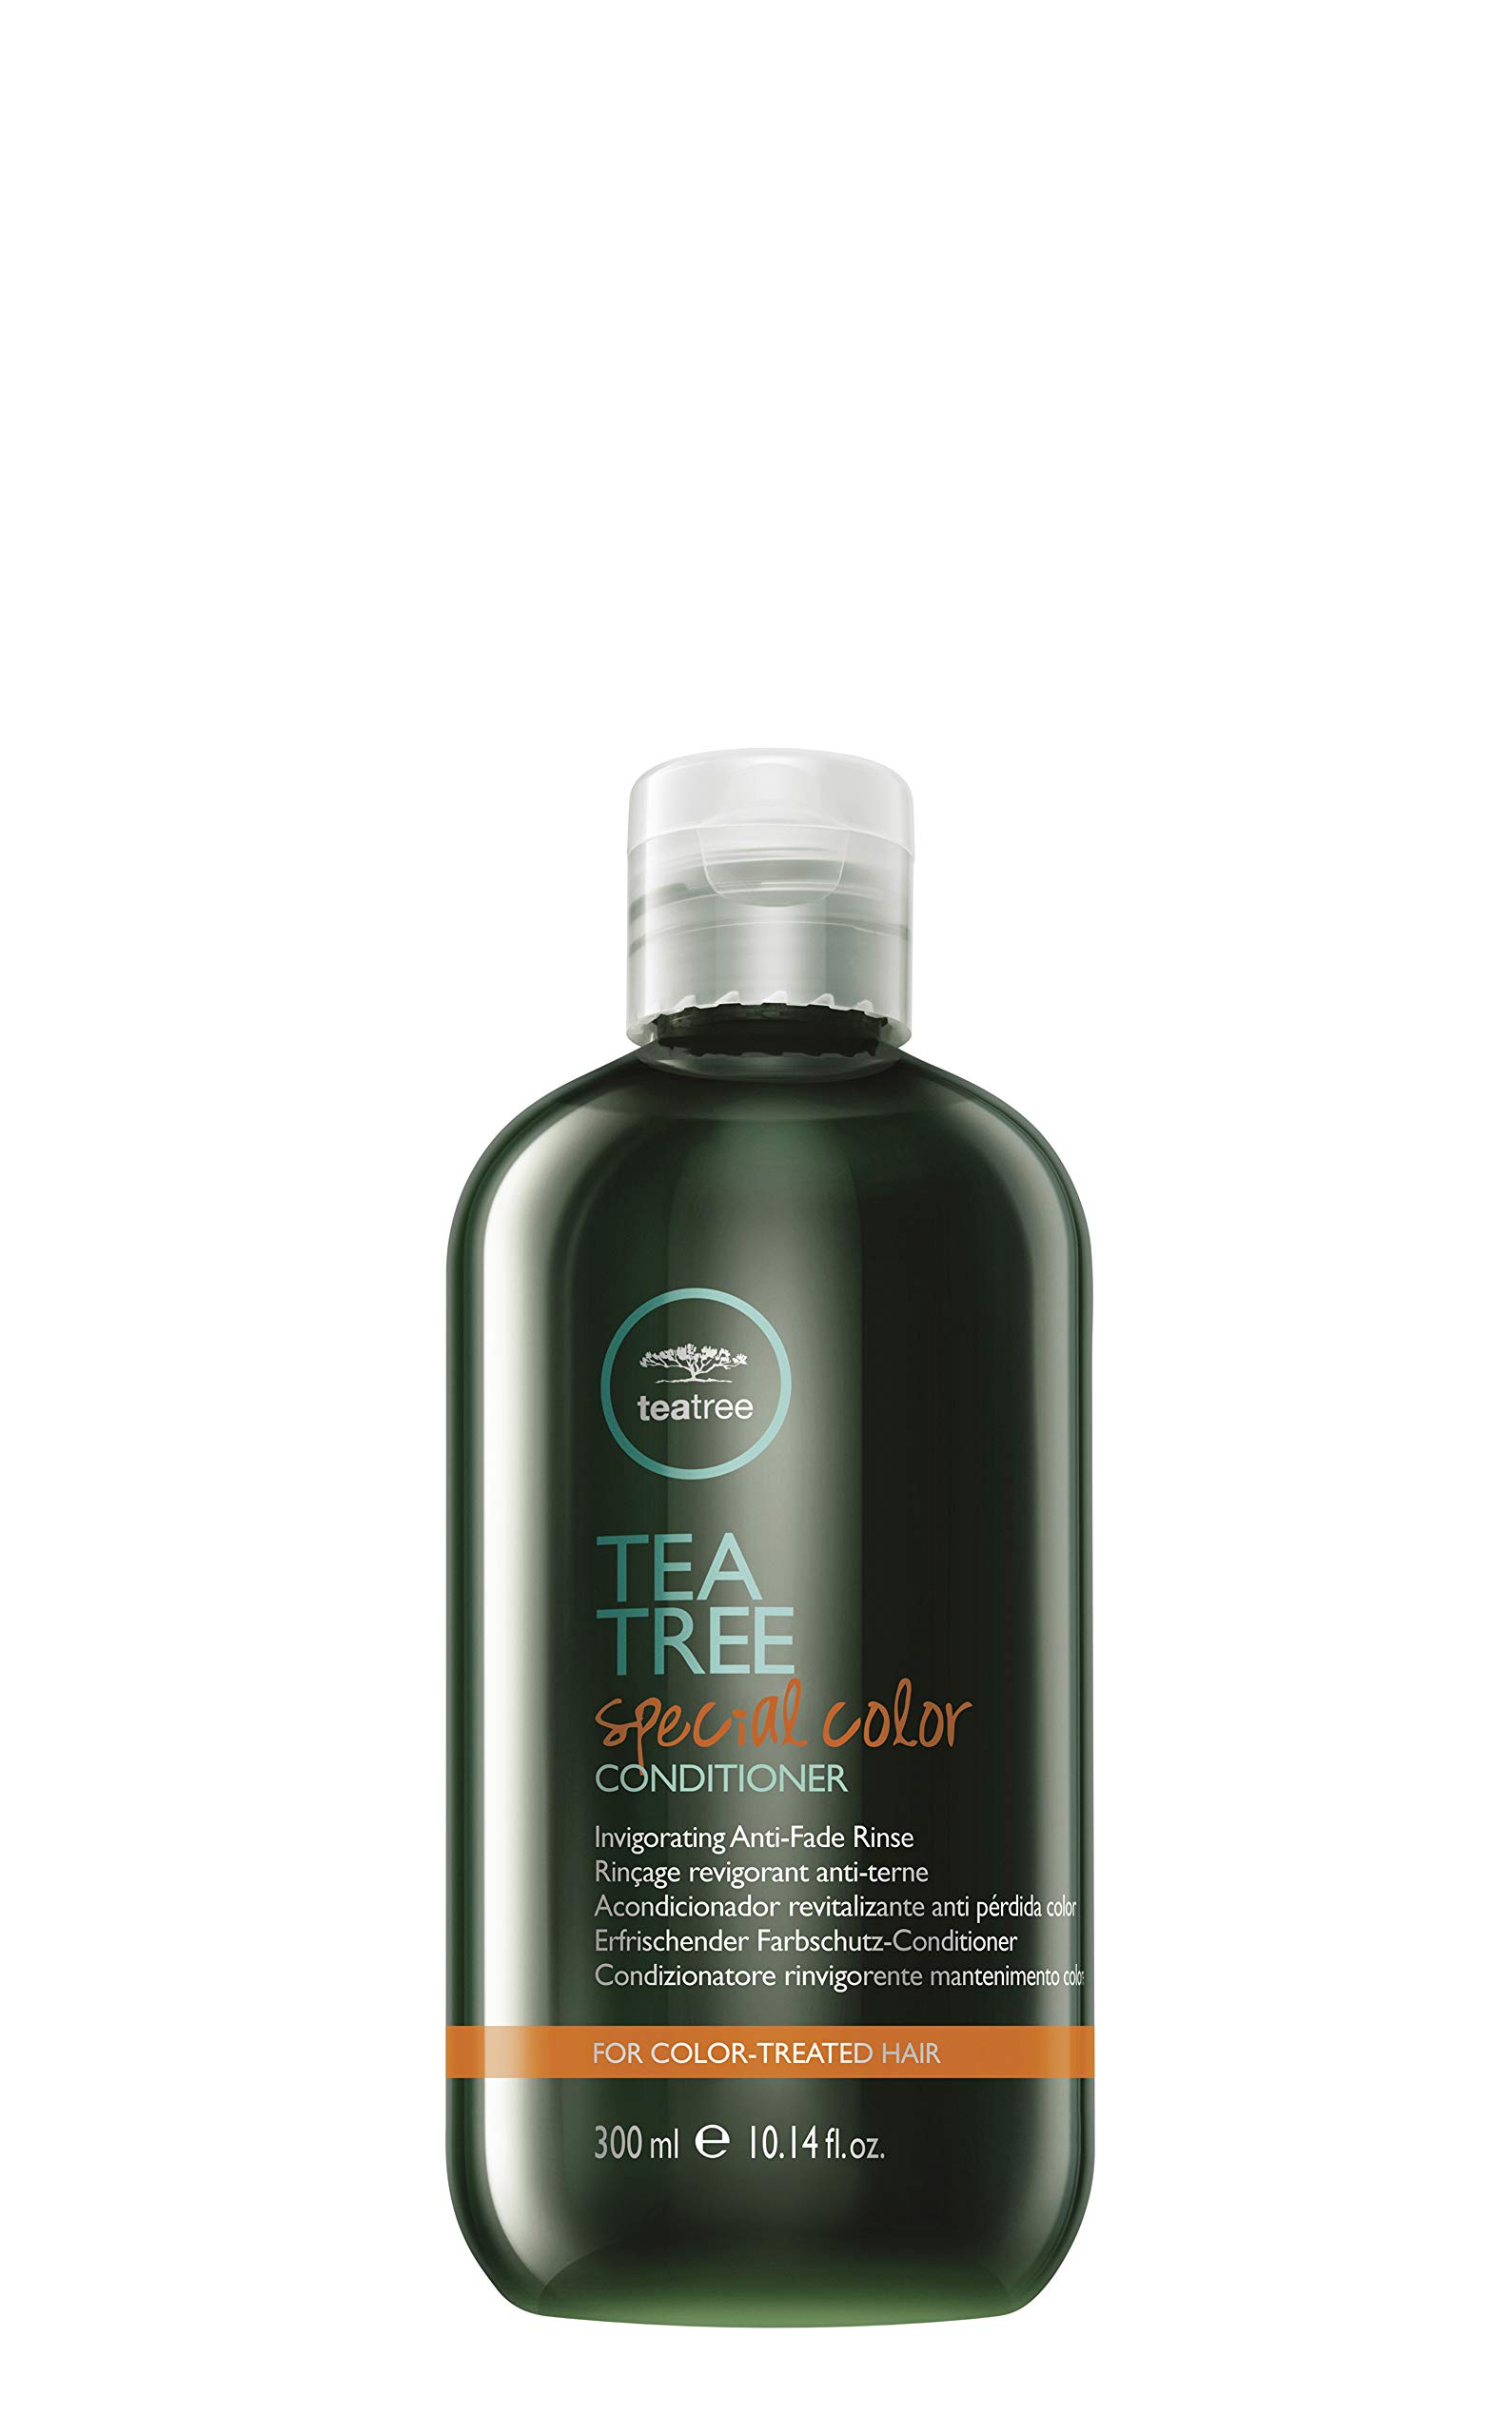 Tea Tree Special Color Conditioner, Conditions + Detangles, Protects Hair Color, For Color-Treated Hair